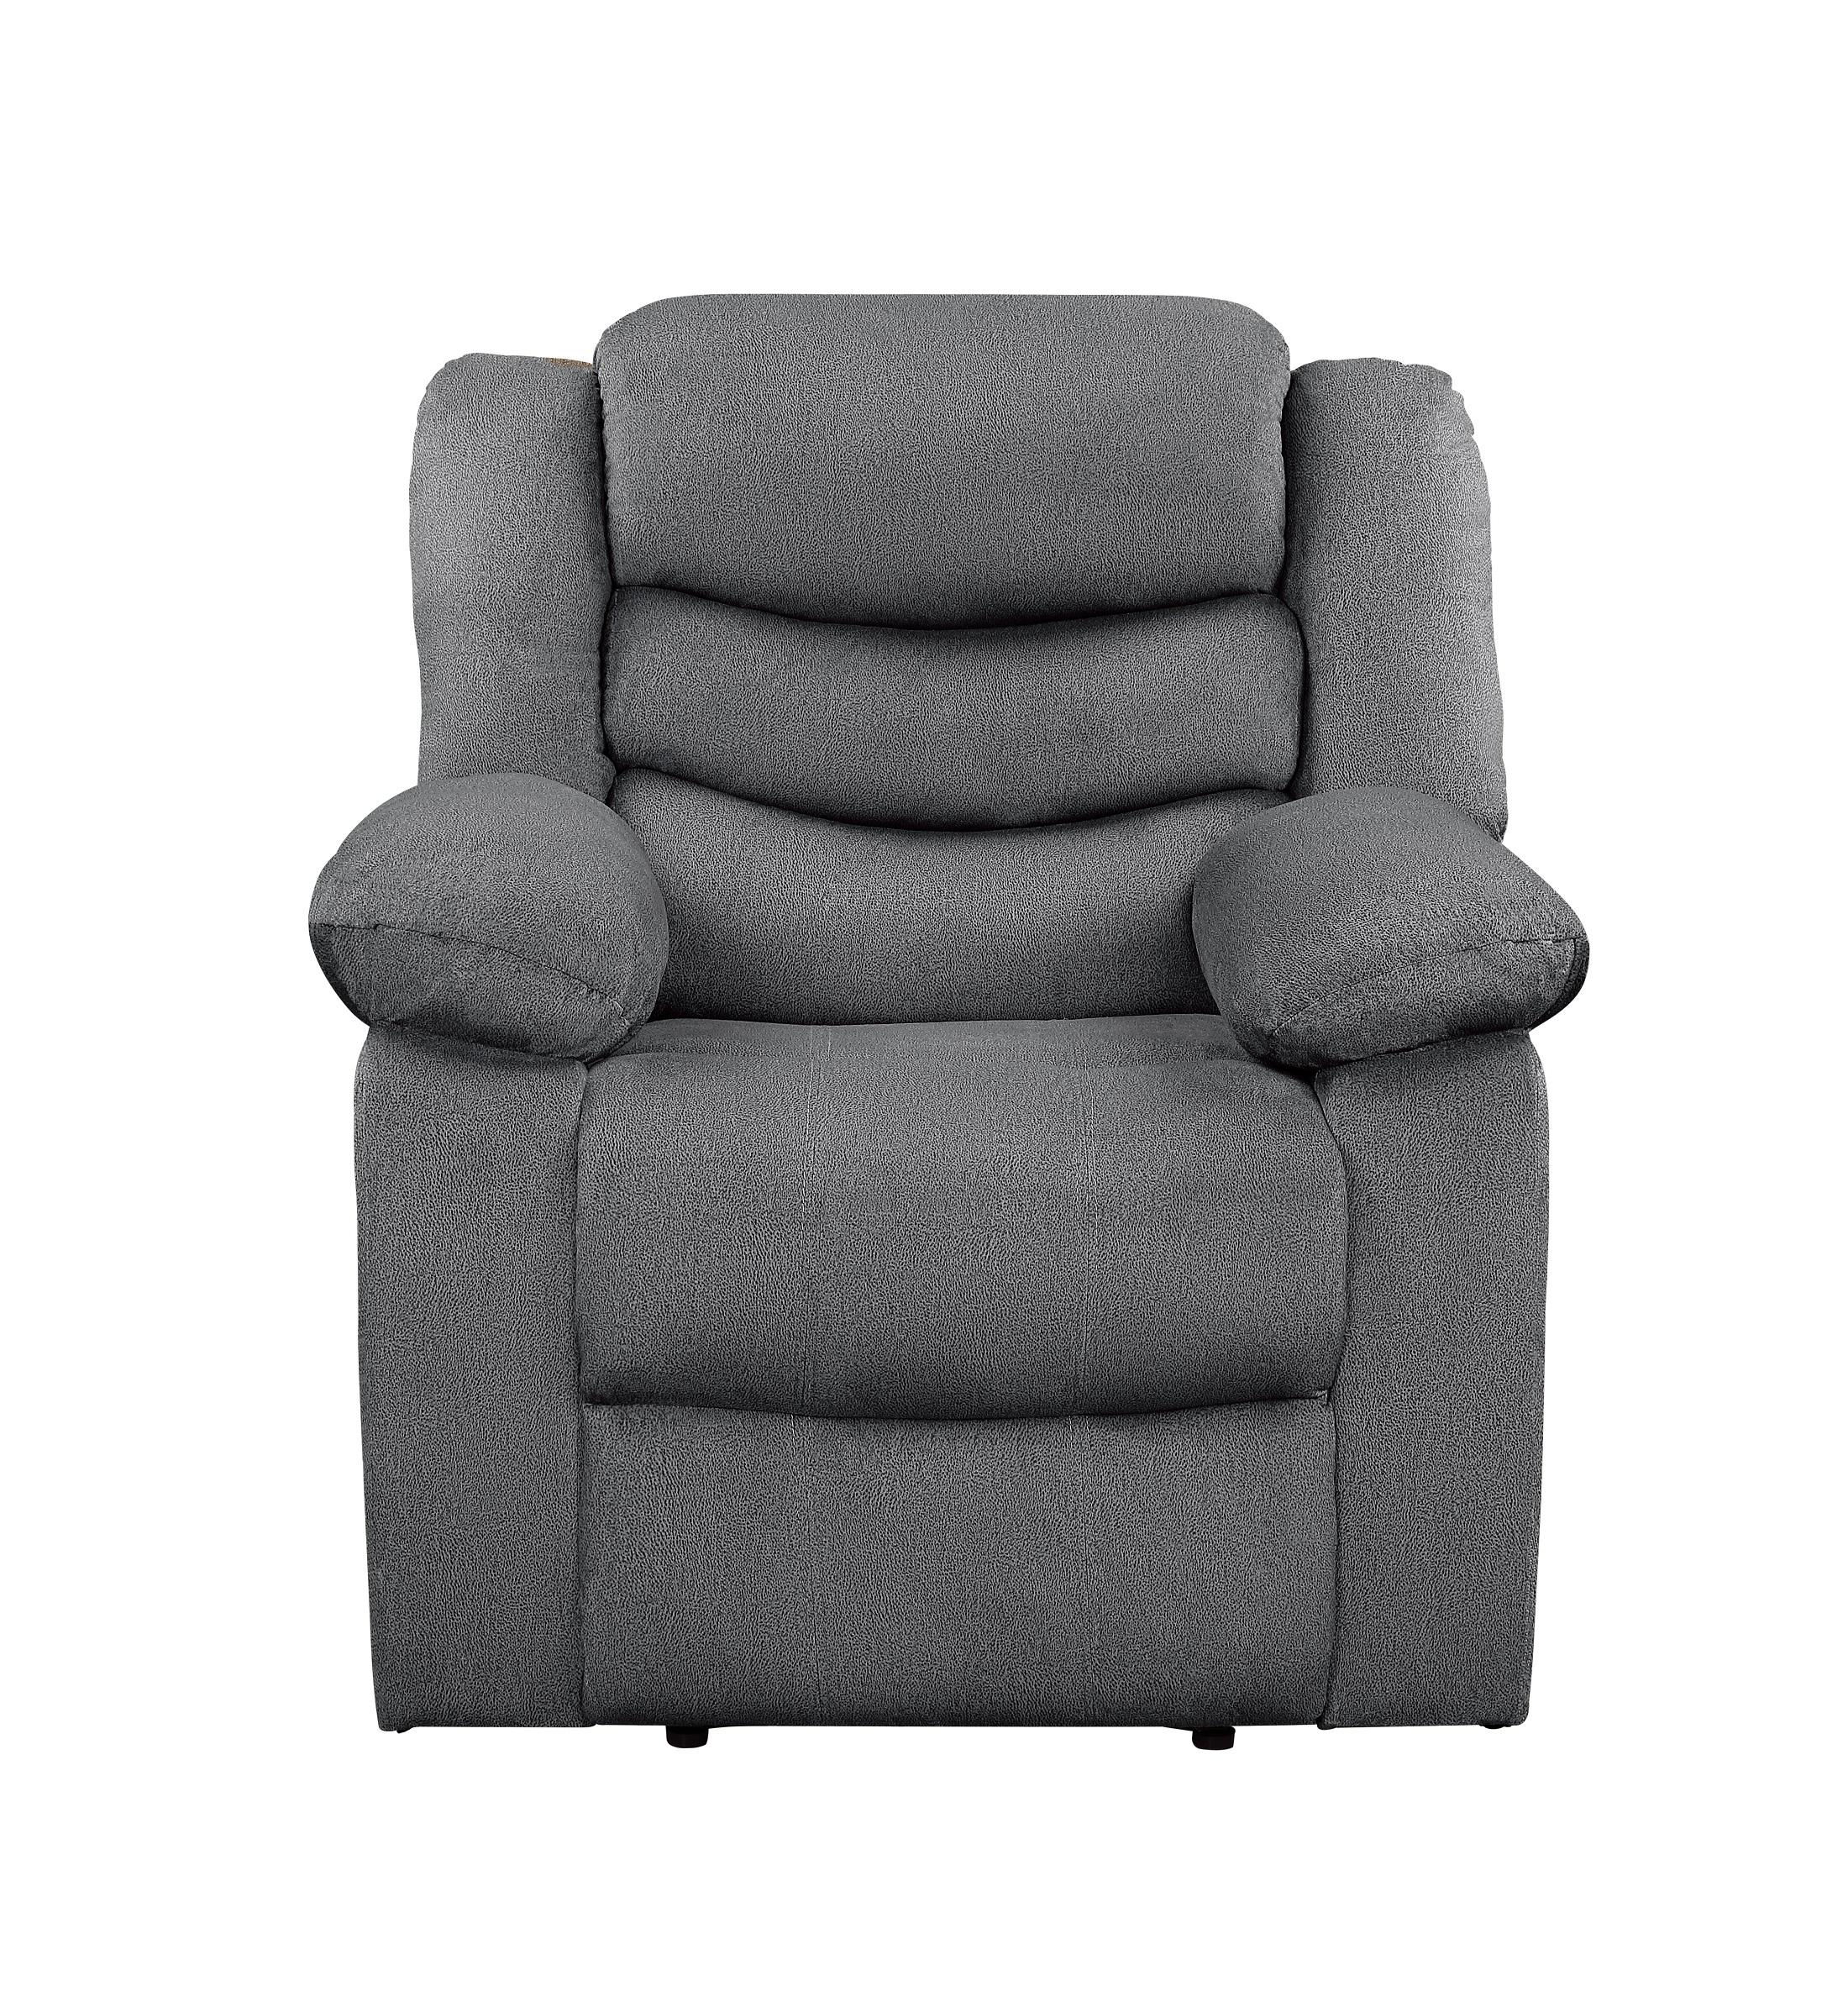 Transitional Reclining Chair 9526GY-1 Discus 9526GY-1 in Gray Microfiber